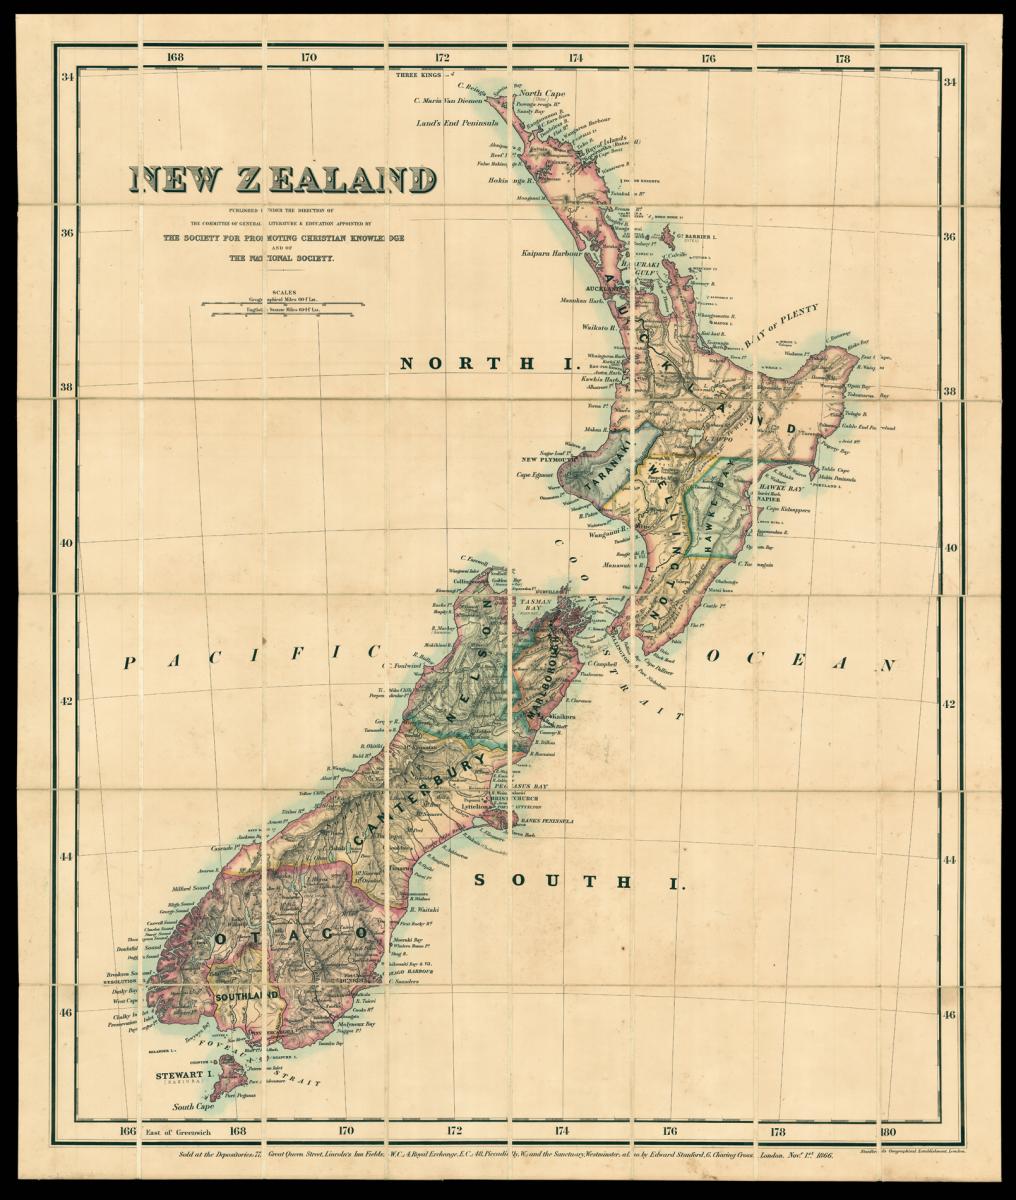 Stanford's large-scale map of New Zealand